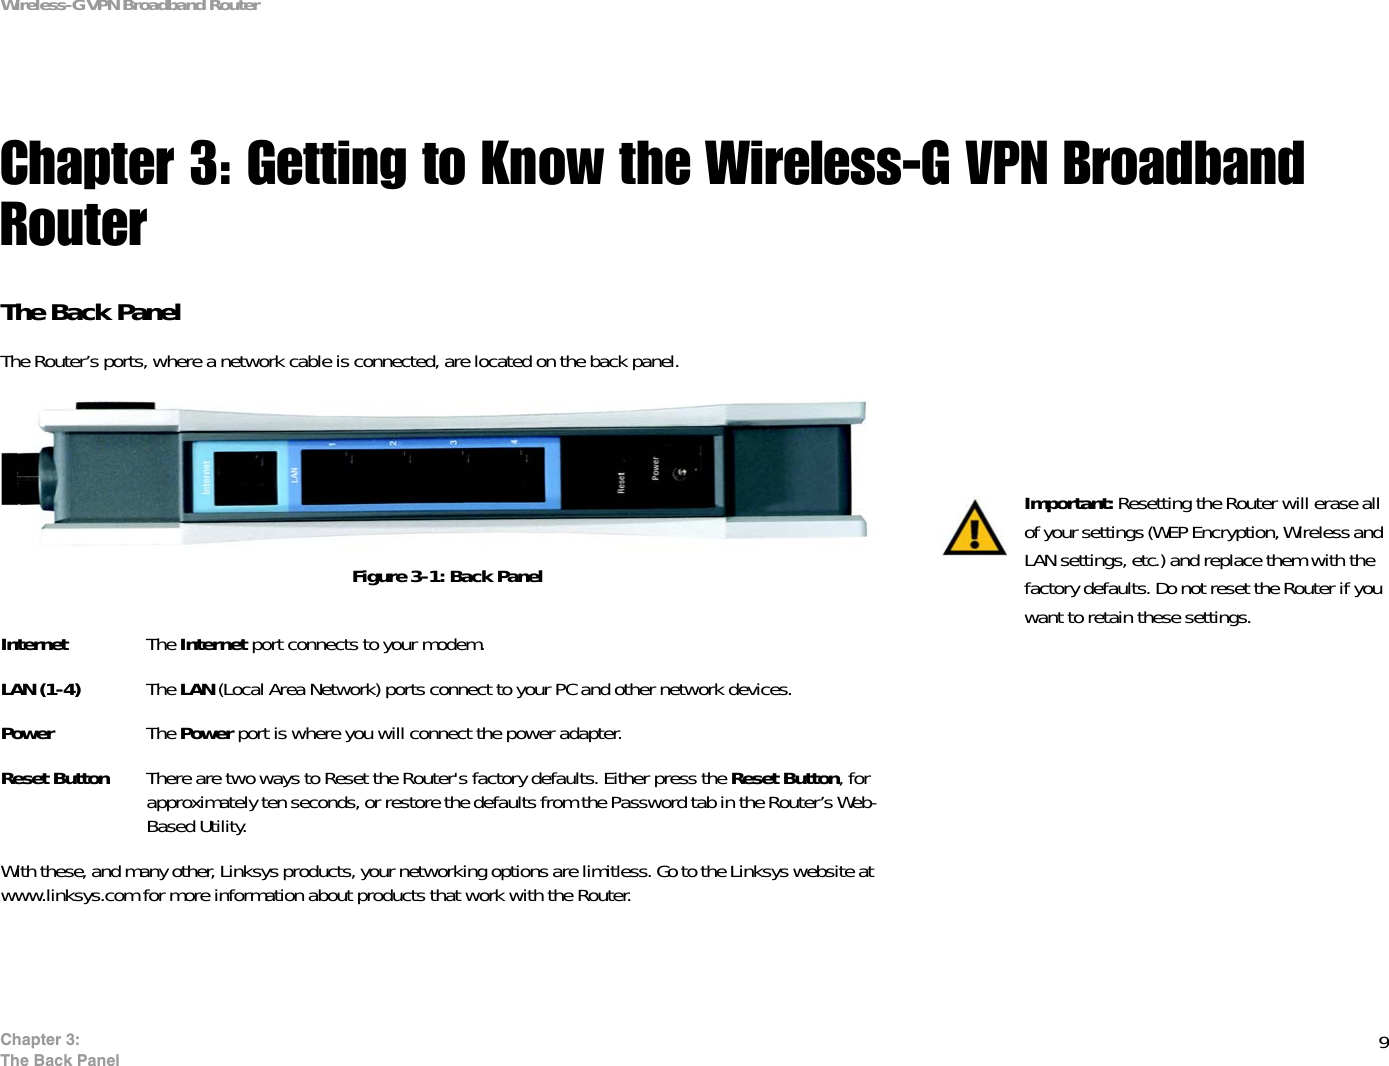 9Chapter 3: The Back PanelWireless-G VPN Broadband RouterChapter 3: Getting to Know the Wireless-G VPN Broadband RouterThe Back PanelThe Router’s ports, where a network cable is connected, are located on the back panel.Internet The Internet port connects to your modem.LAN (1-4) The LAN (Local Area Network) ports connect to your PC and other network devices.Power The Power port is where you will connect the power adapter.Reset Button There are two ways to Reset the Router&apos;s factory defaults. Either press the Reset Button, for approximately ten seconds, or restore the defaults from the Password tab in the Router’s Web-Based Utility.With these, and many other, Linksys products, your networking options are limitless. Go to the Linksys website at www.linksys.com for more information about products that work with the Router. Important: Resetting the Router will erase all of your settings (WEP Encryption, Wireless and LAN settings, etc.) and replace them with the factory defaults. Do not reset the Router if you want to retain these settings.Figure 3-1: Back Panel